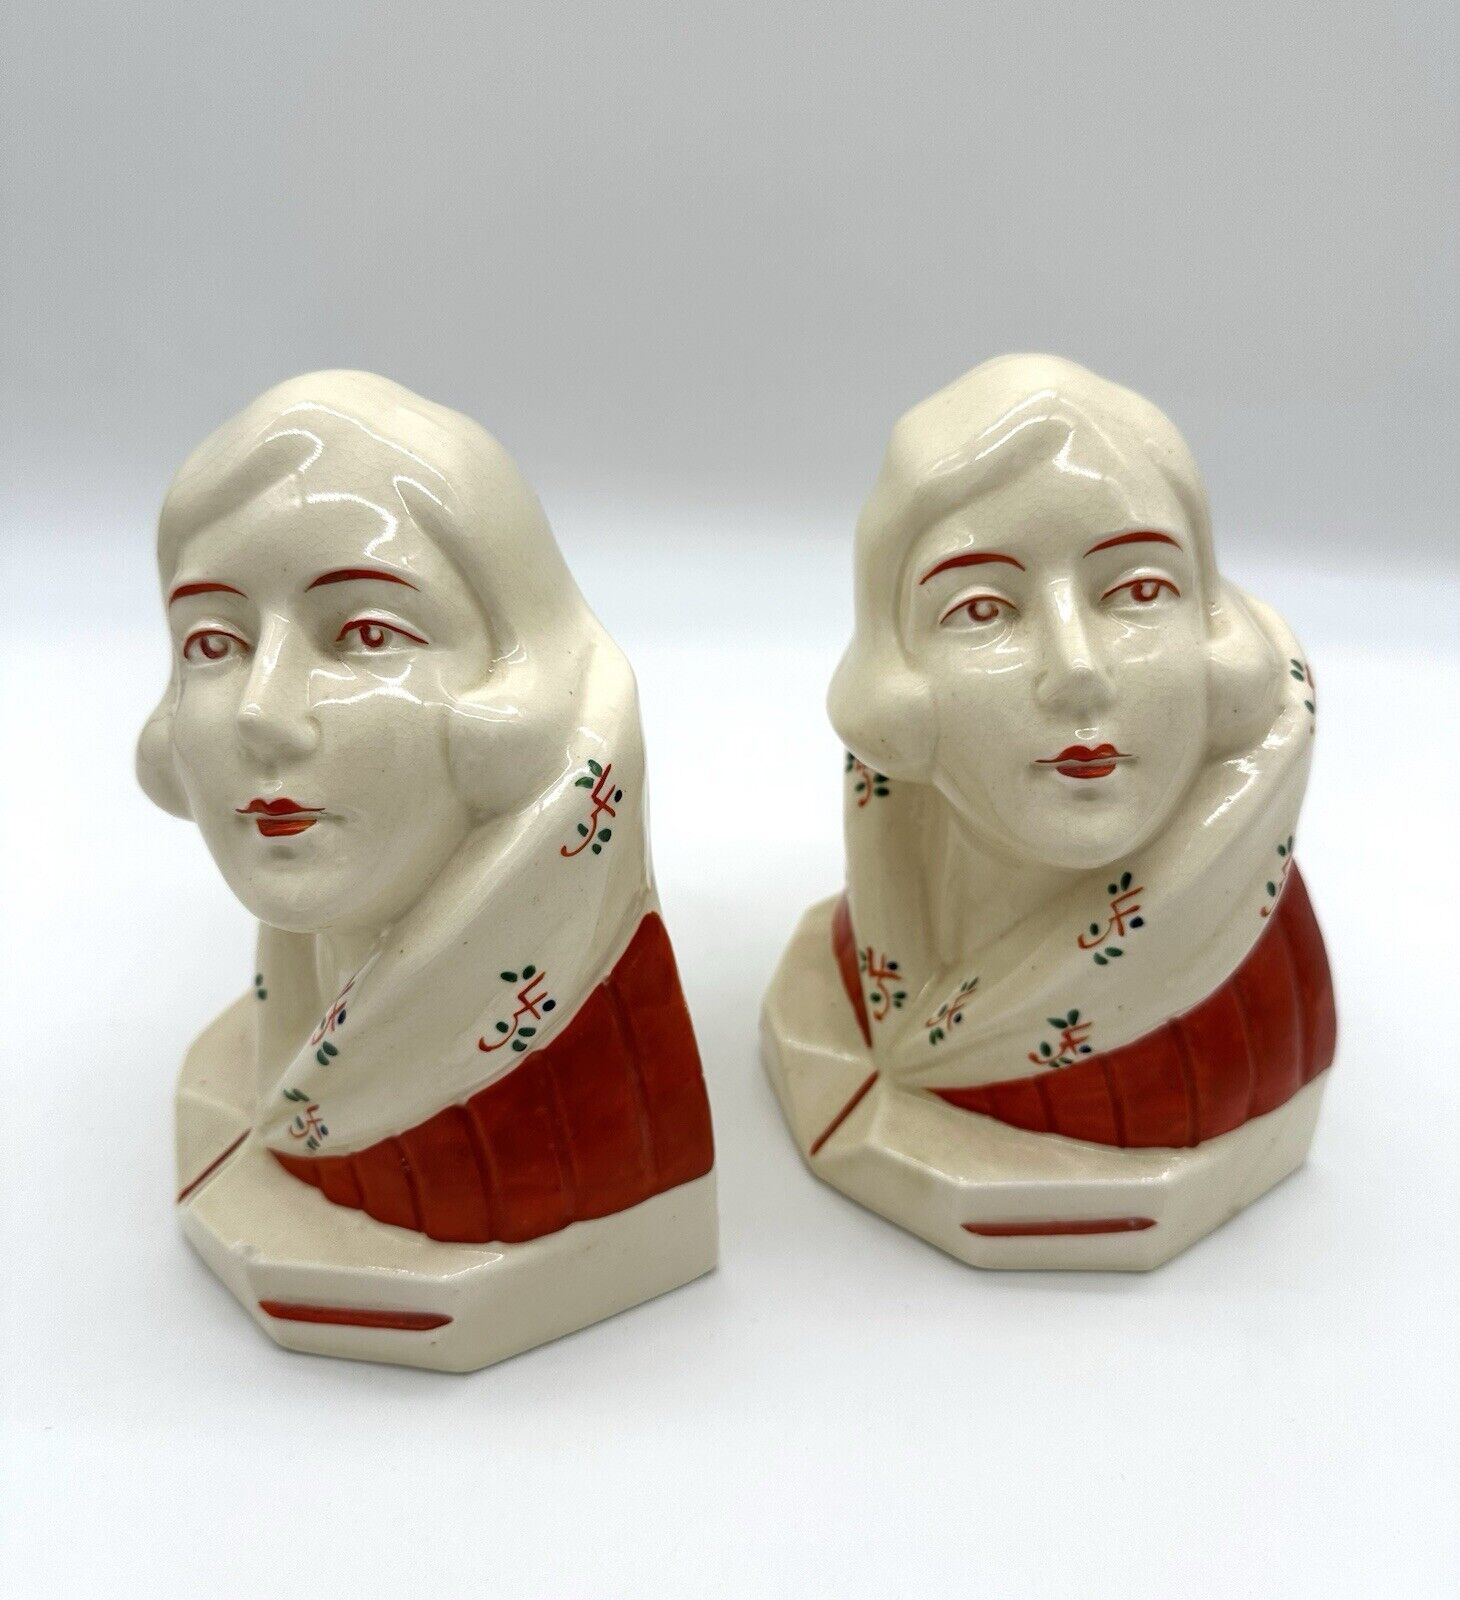 Pair of Ceramic Deco Ladies Head Bust Book Ends-Hand Painted Red And White